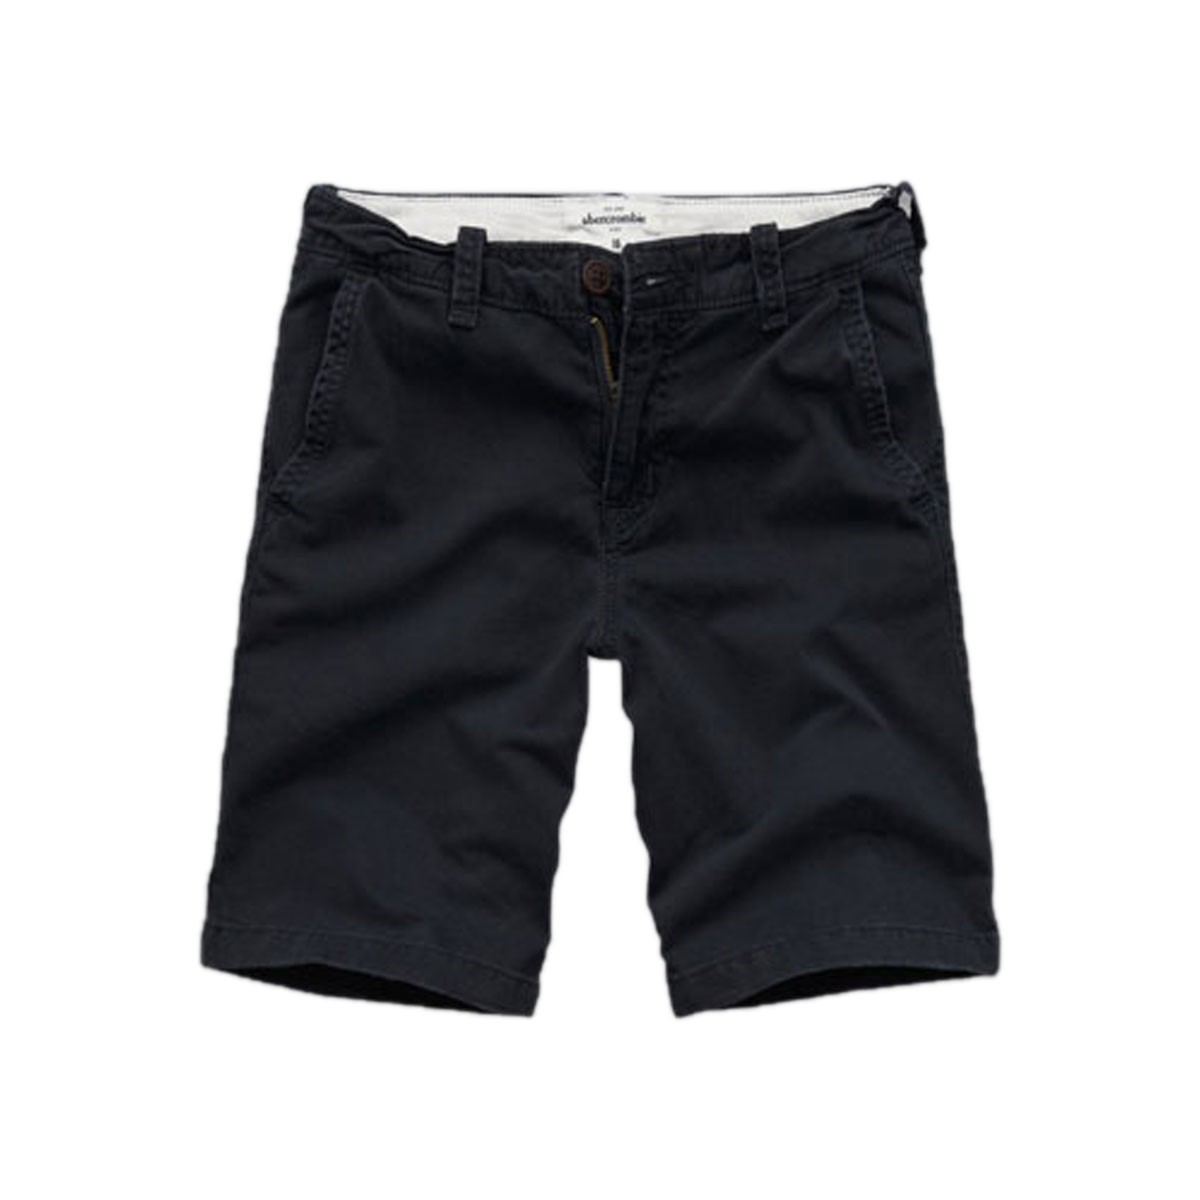 Хå AbercrombieKids  Ҷ ܡ 硼ȥѥ a&f classic fit shorts 228-688-0249-023